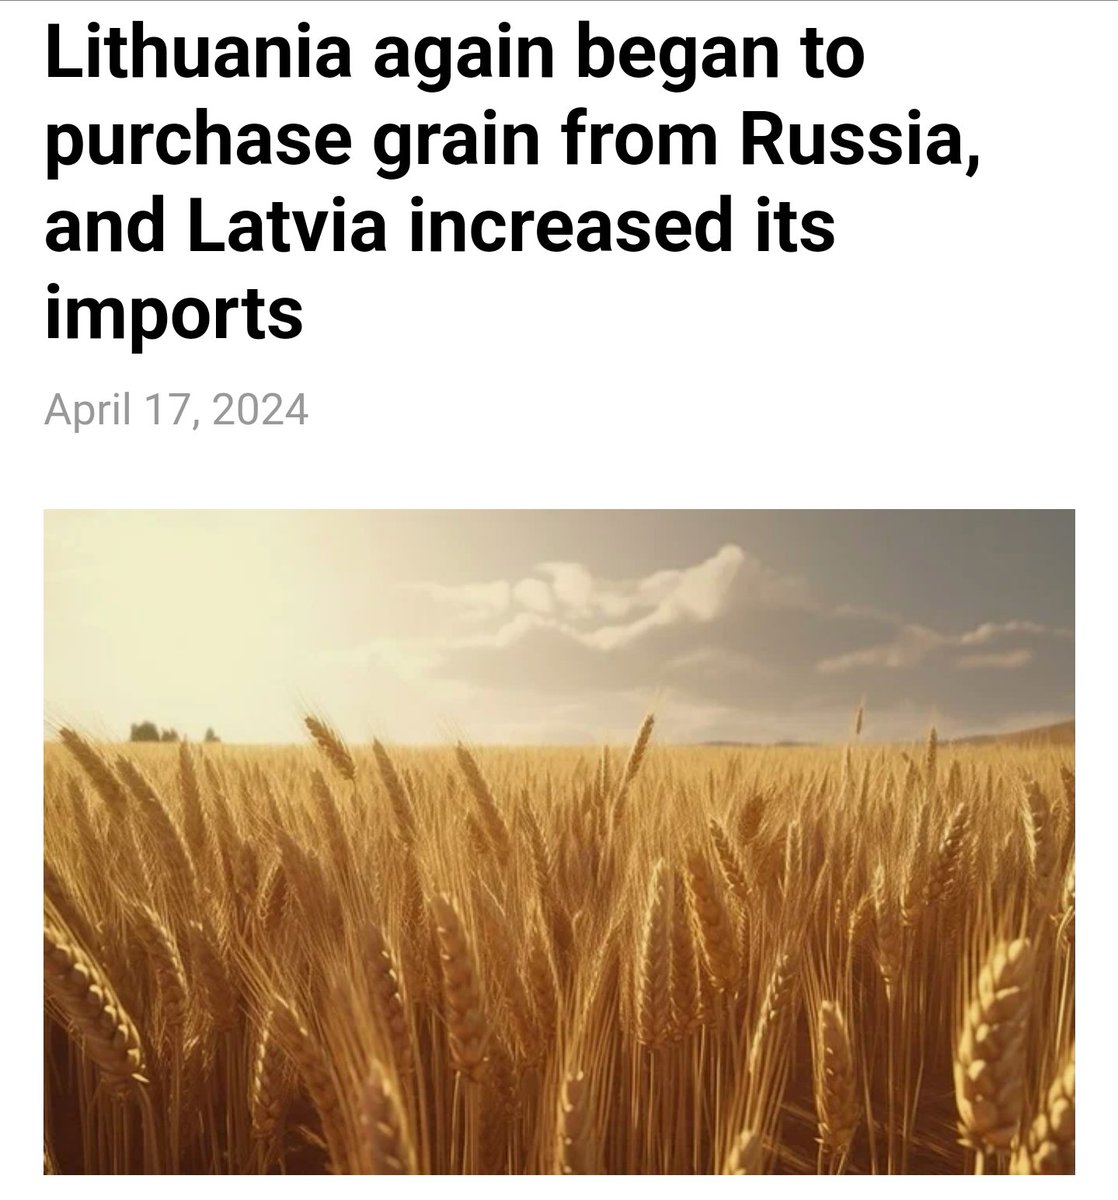 Latvia and Lithuania have decided to open the 2nd front and to create Holodomor 2.0 in Russia by increasing the purchase of Russian grain in an attempt to starve the population of Russia.